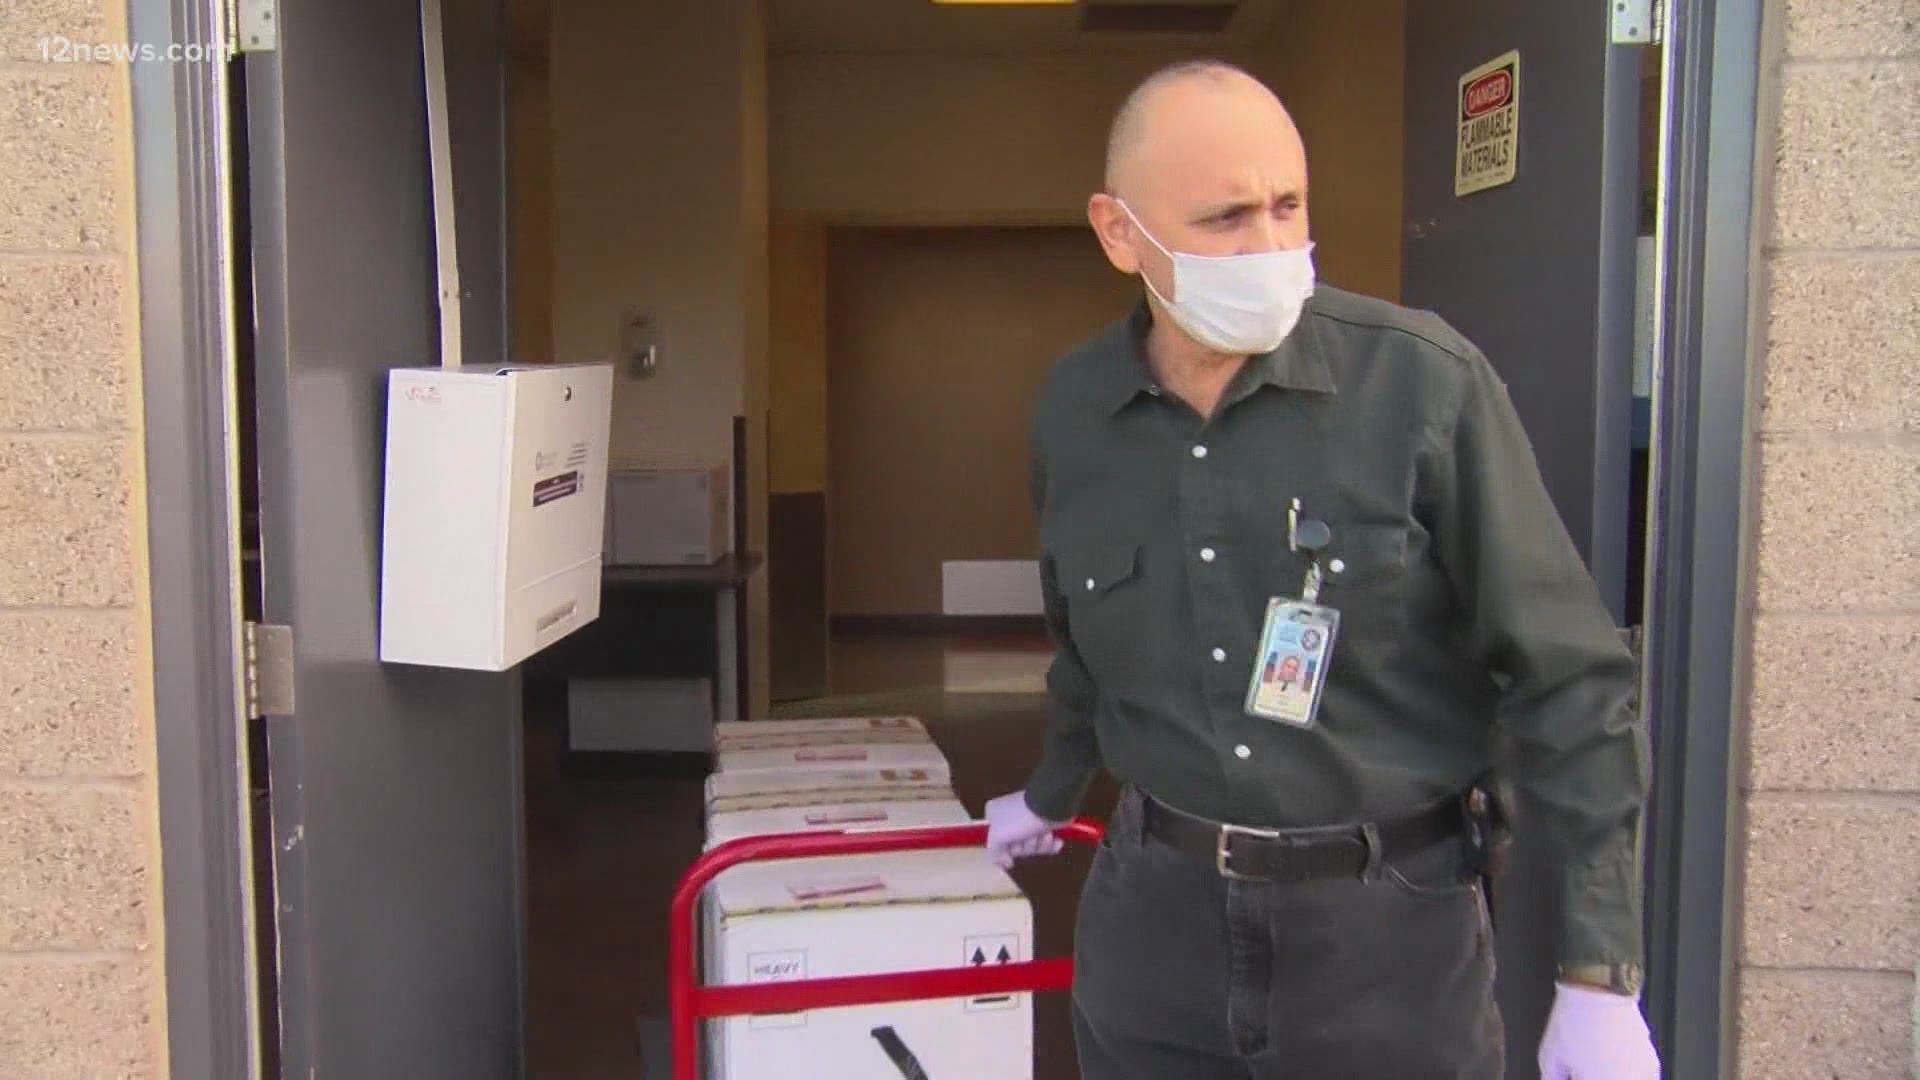 The first shipment of Pfizer's coronavirus vaccine arrived in Arizona Monday morning. They come as Arizona reported more than 11,000 new COVID-19 cases on Monday.